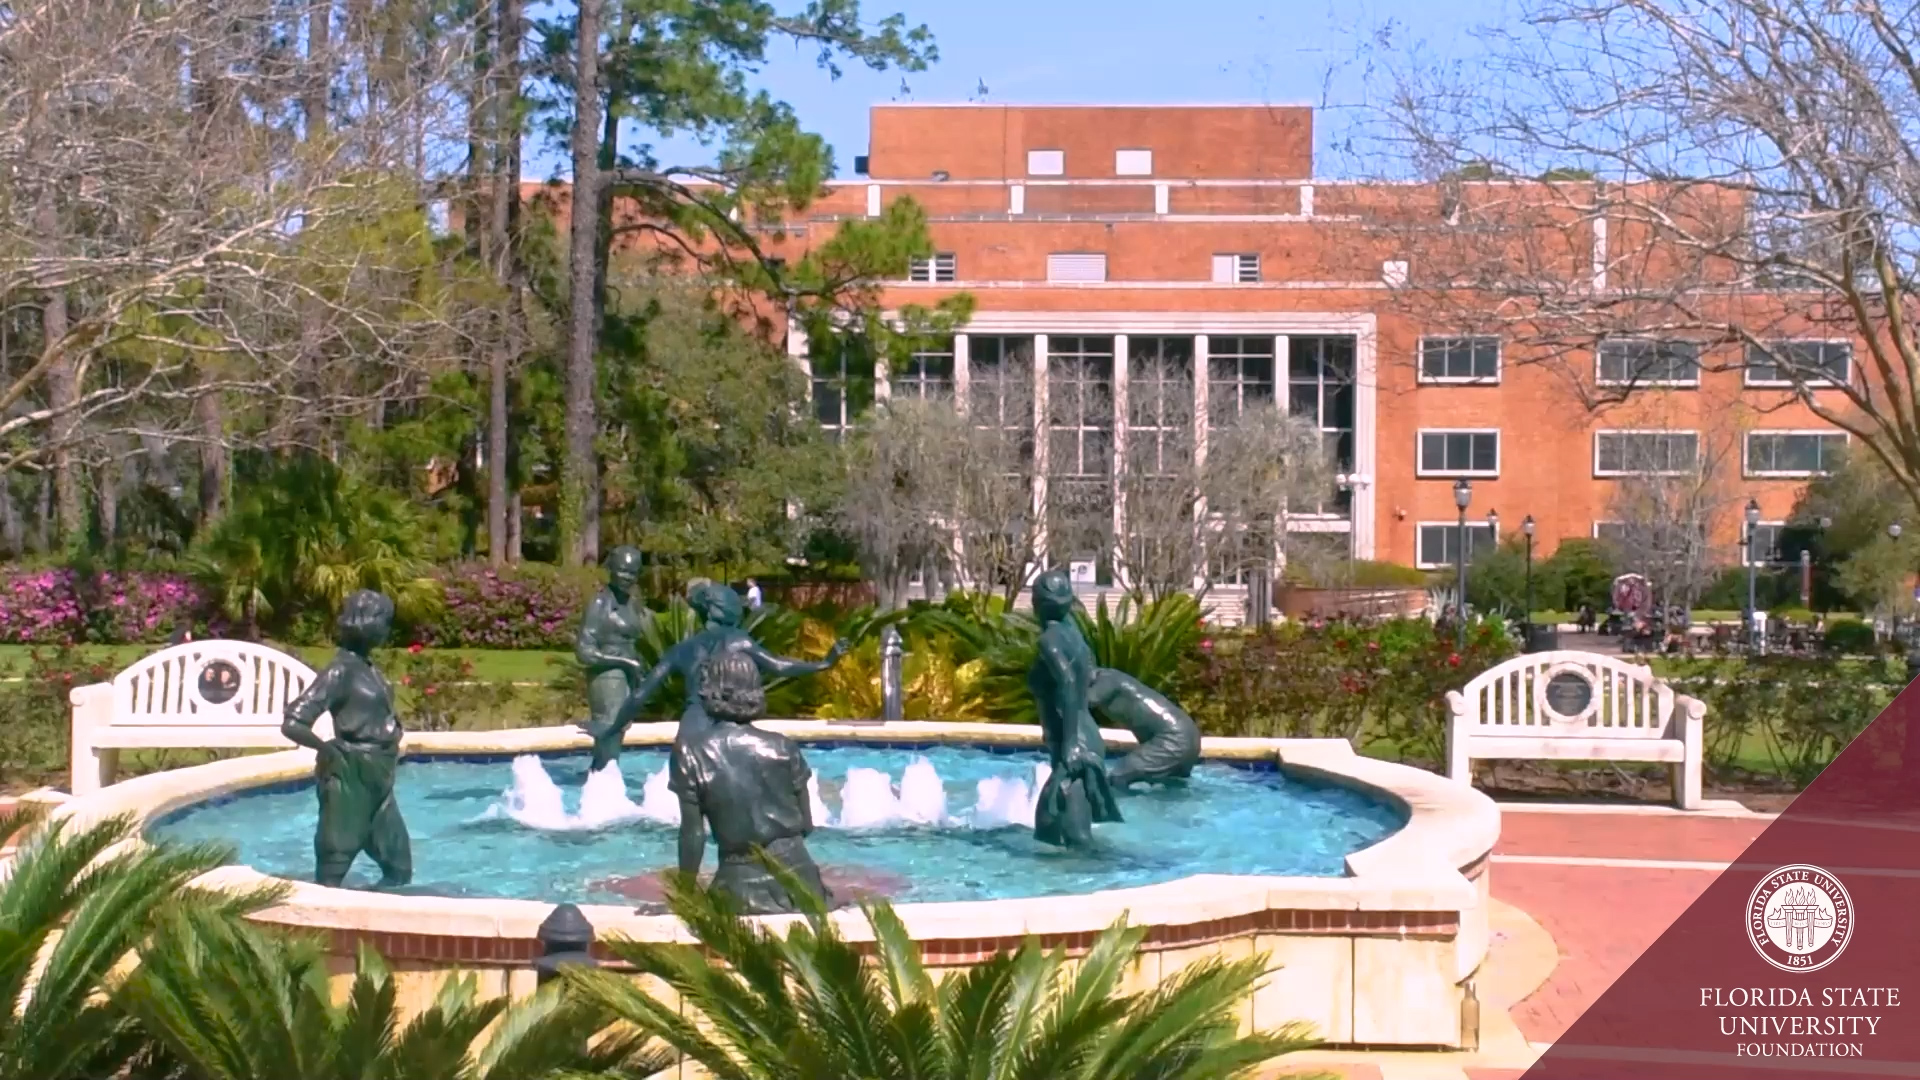 Legacy Fountain with Strozier in background